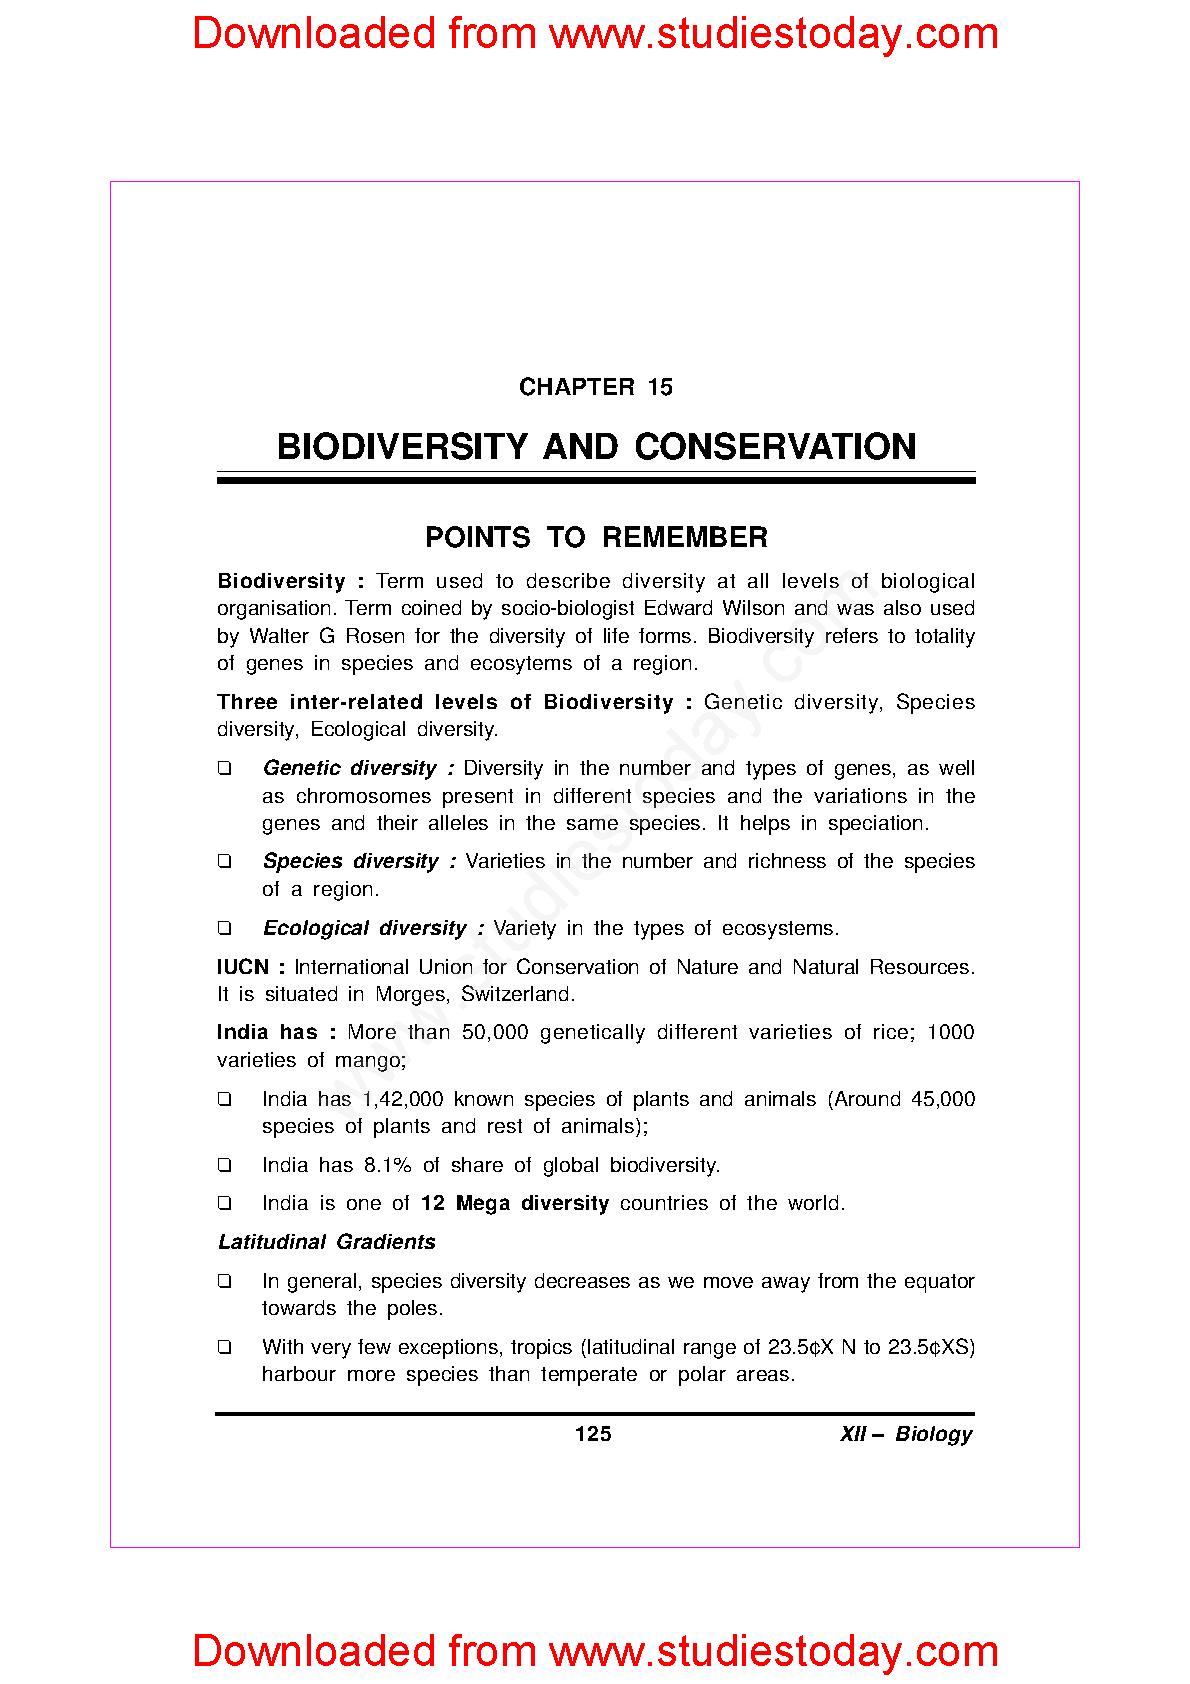 biodiversity research assignment